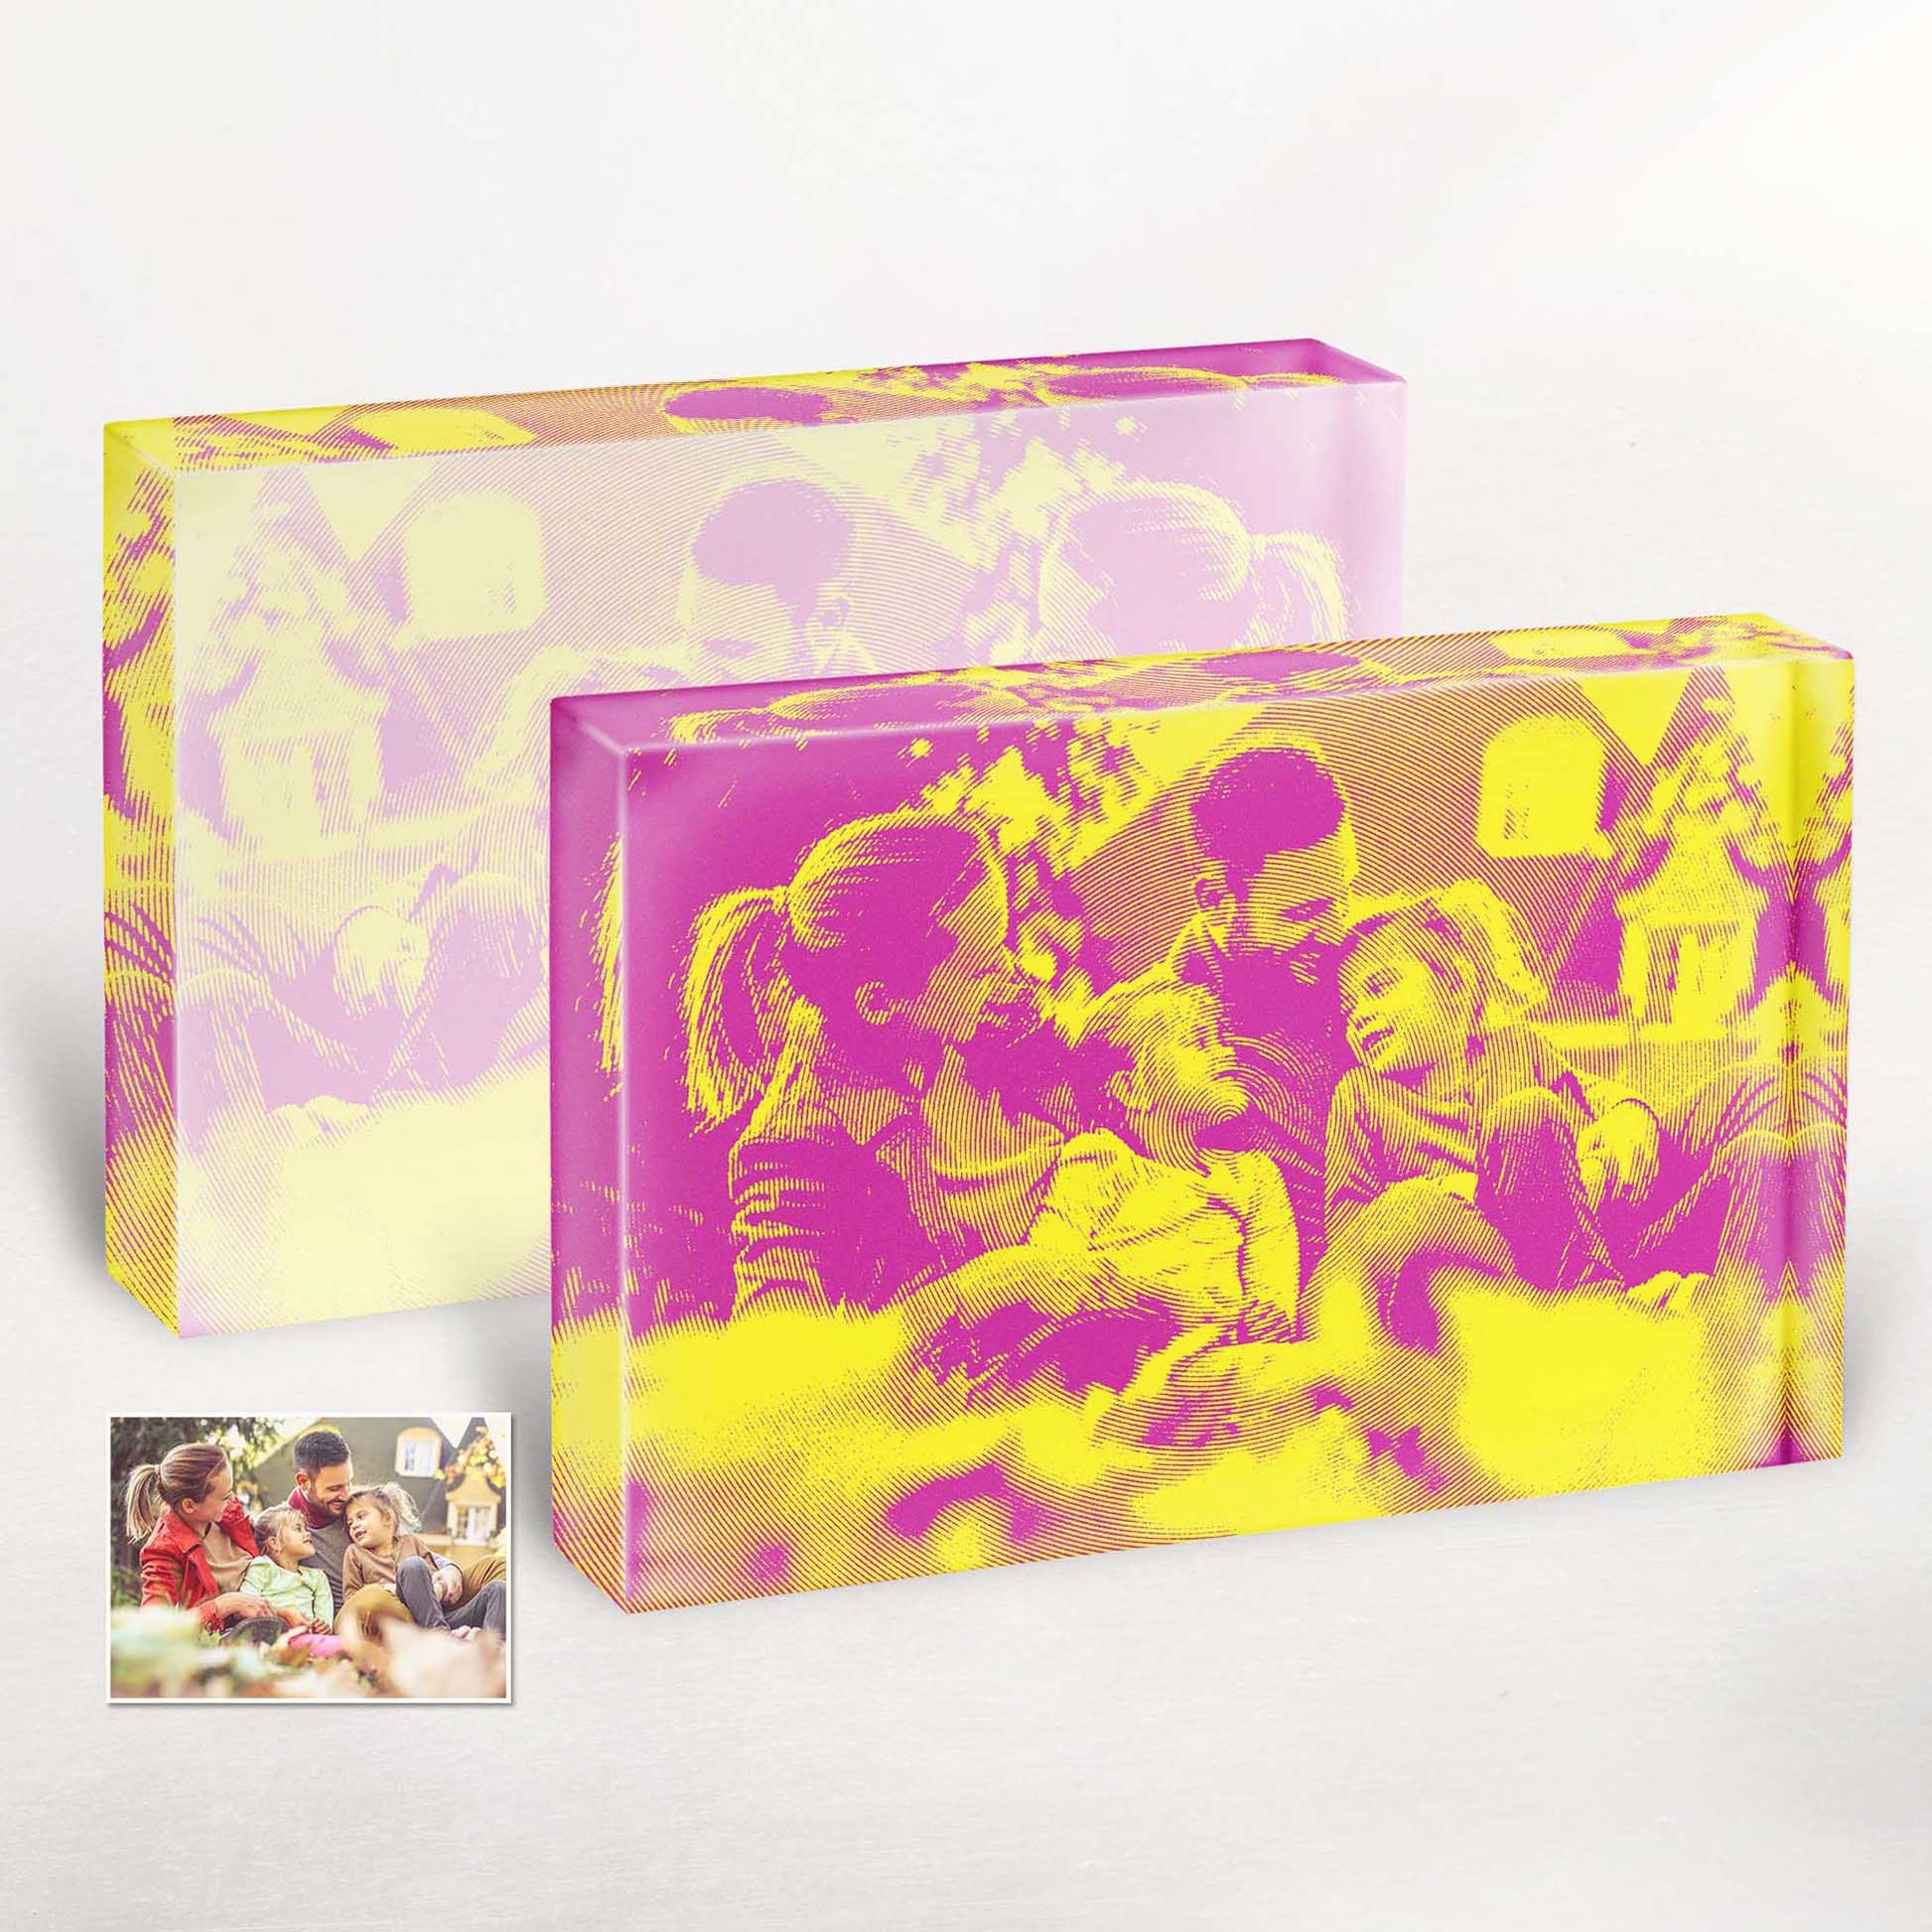 Transform your space with this Personalised Abstract Texture Effect Acrylic Block Photo. The unique texture and vibrant colors create a captivating visual experience, adding depth and character to your home decor